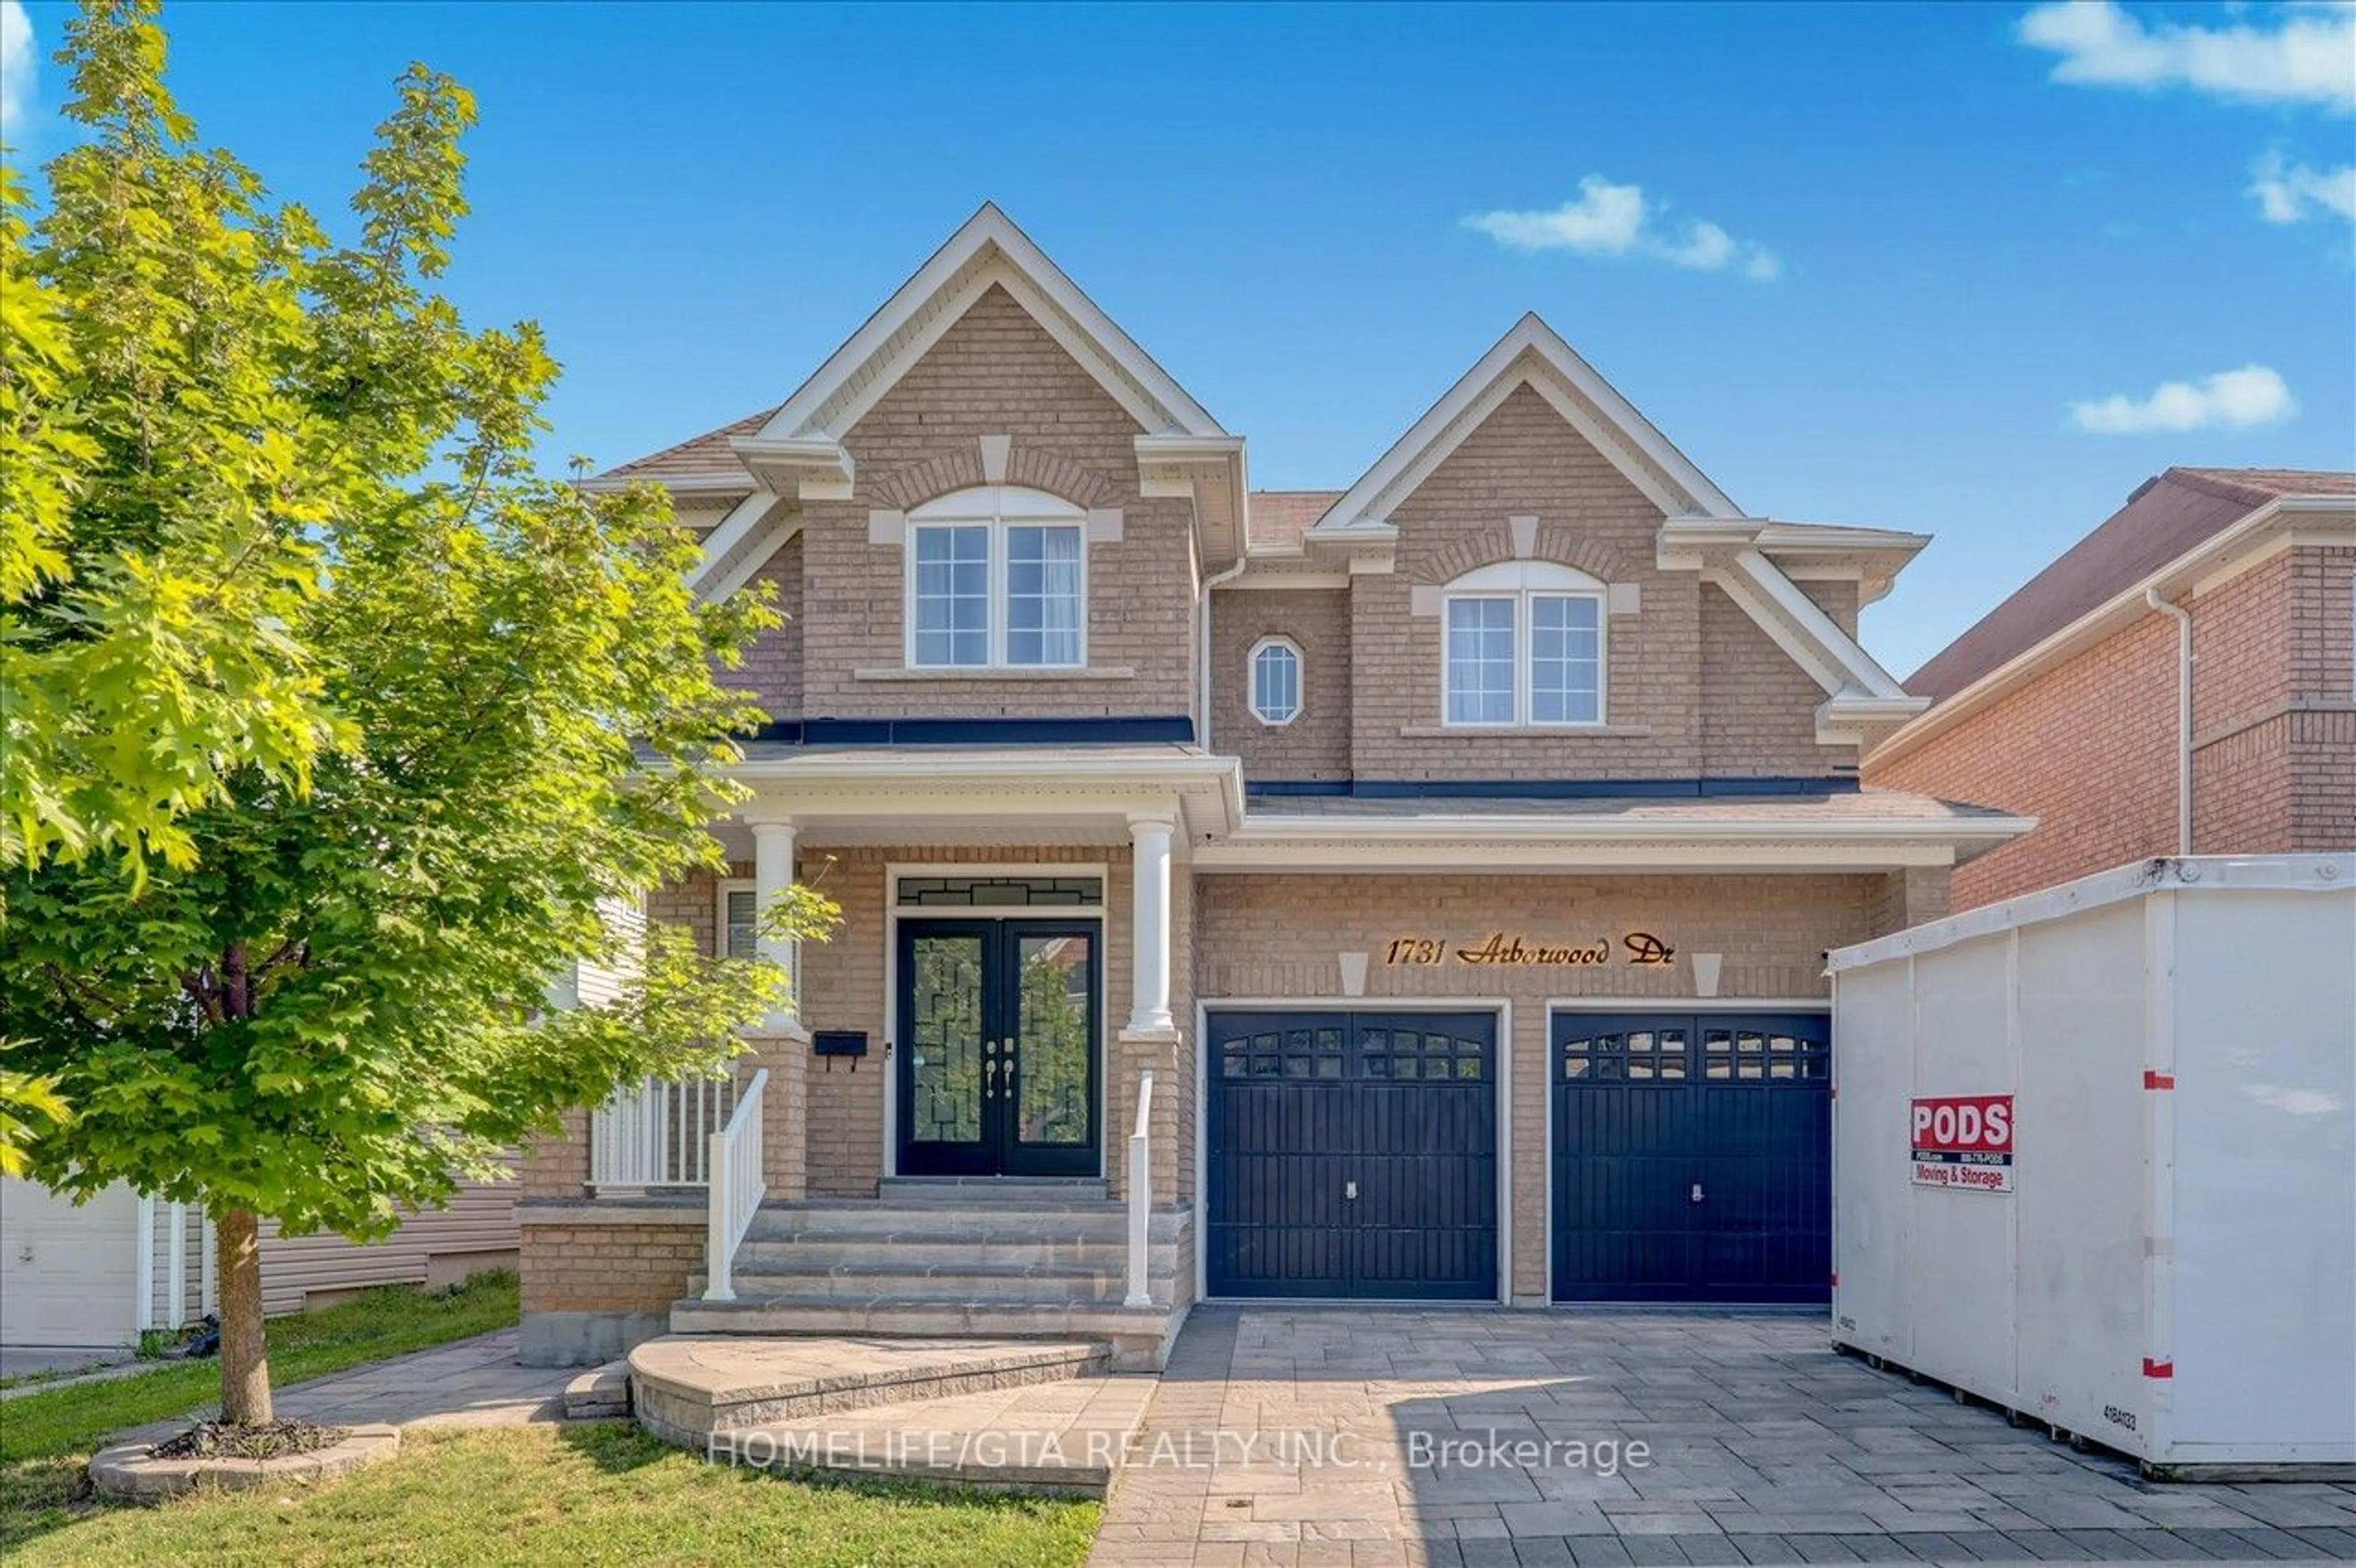 Home with brick exterior material for 1731 Arborwood Dr, Oshawa Ontario L1K 0R6